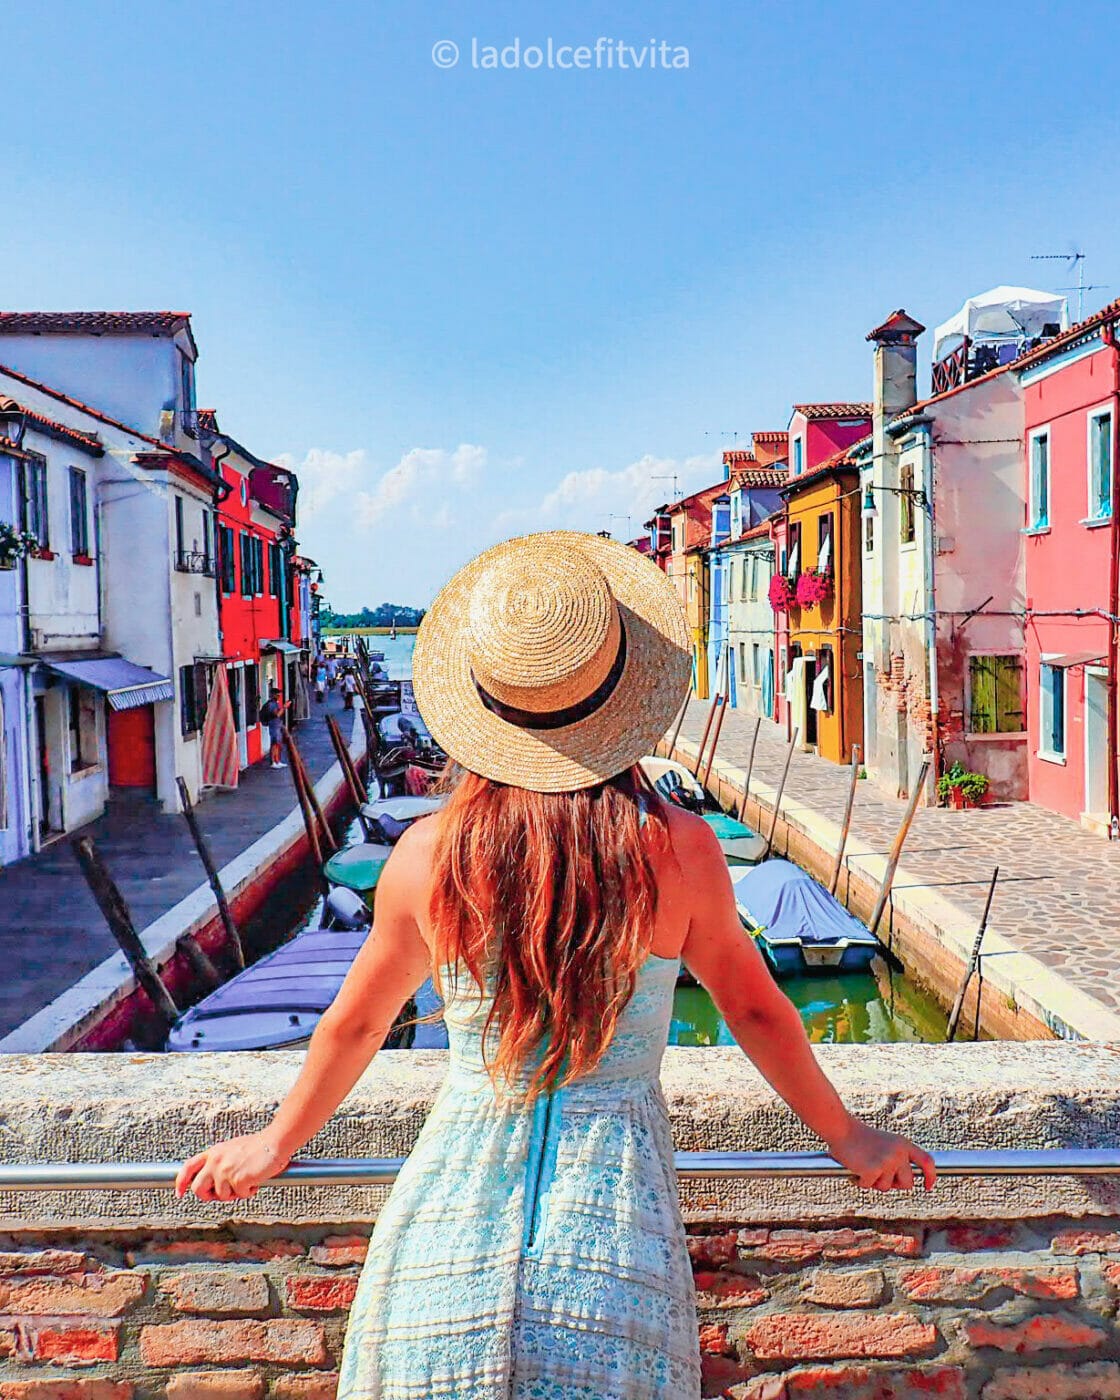 a woman in a summer dress and wearing a sunhat stands on the middle of a bridge stretching over a canal in the very colorful island of Burano in Venice Italy